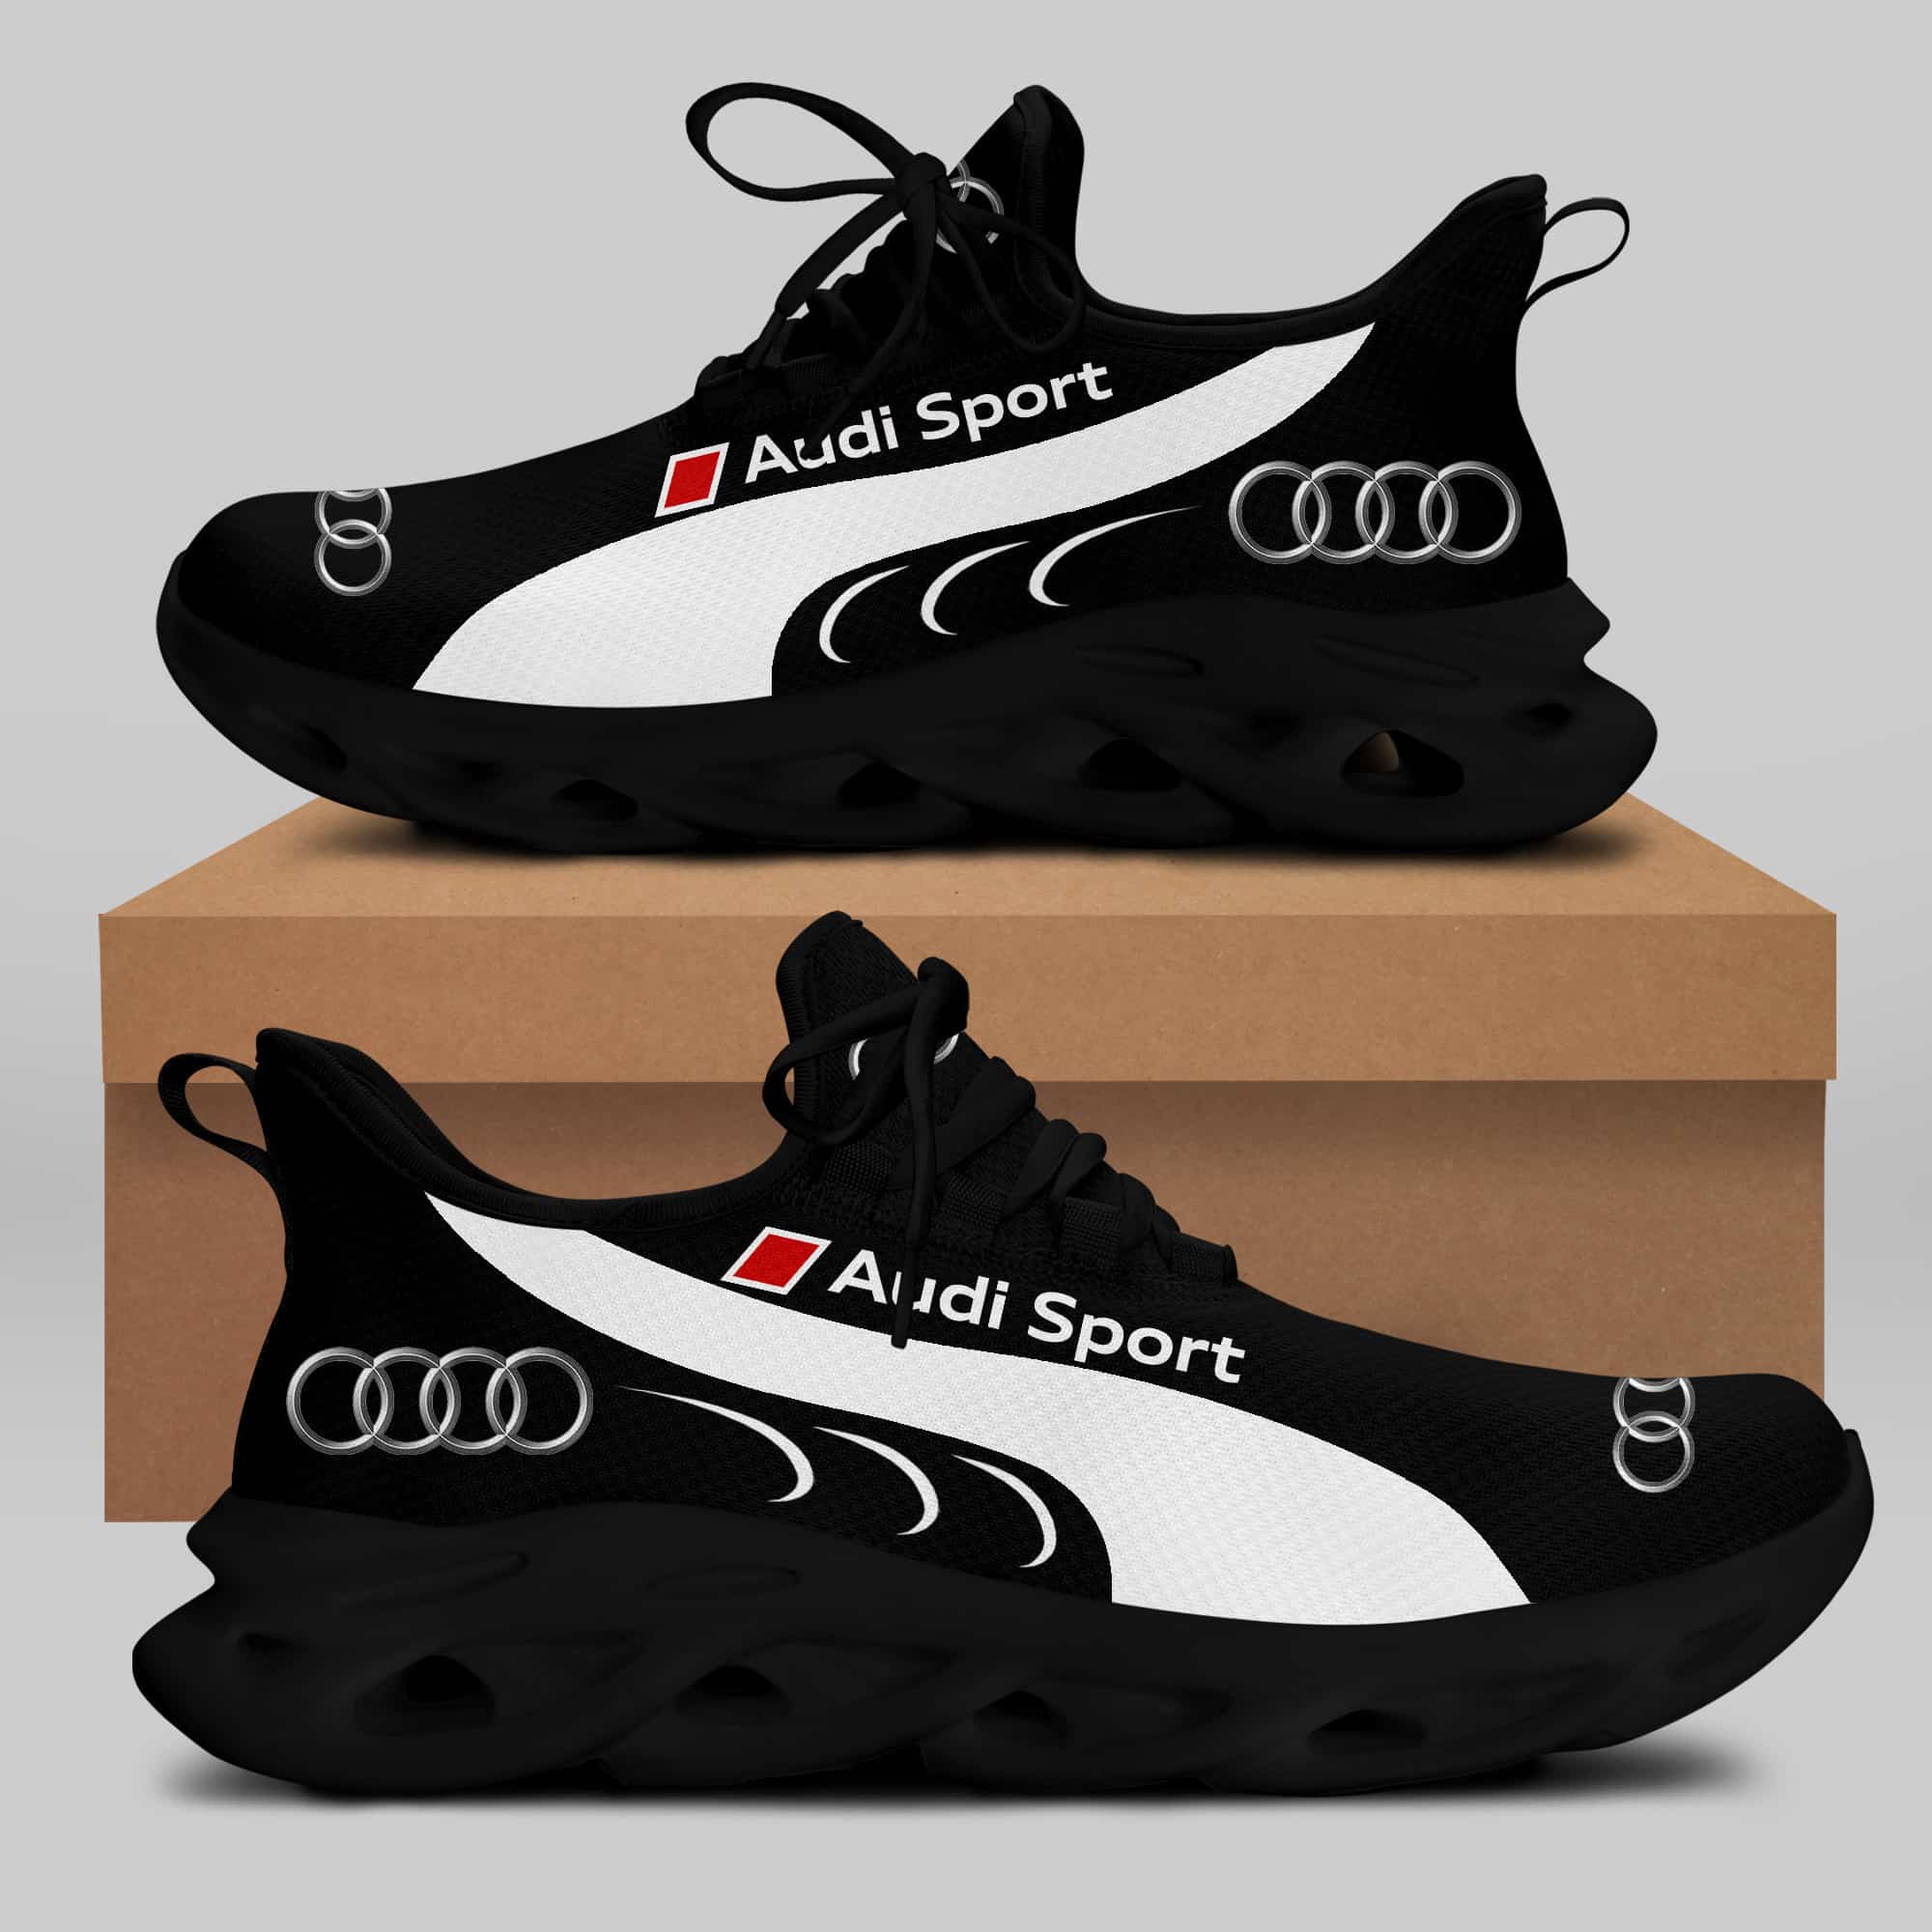 Audi Sport Running Shoes Max Soul Shoes Sneakers Ver 31 1